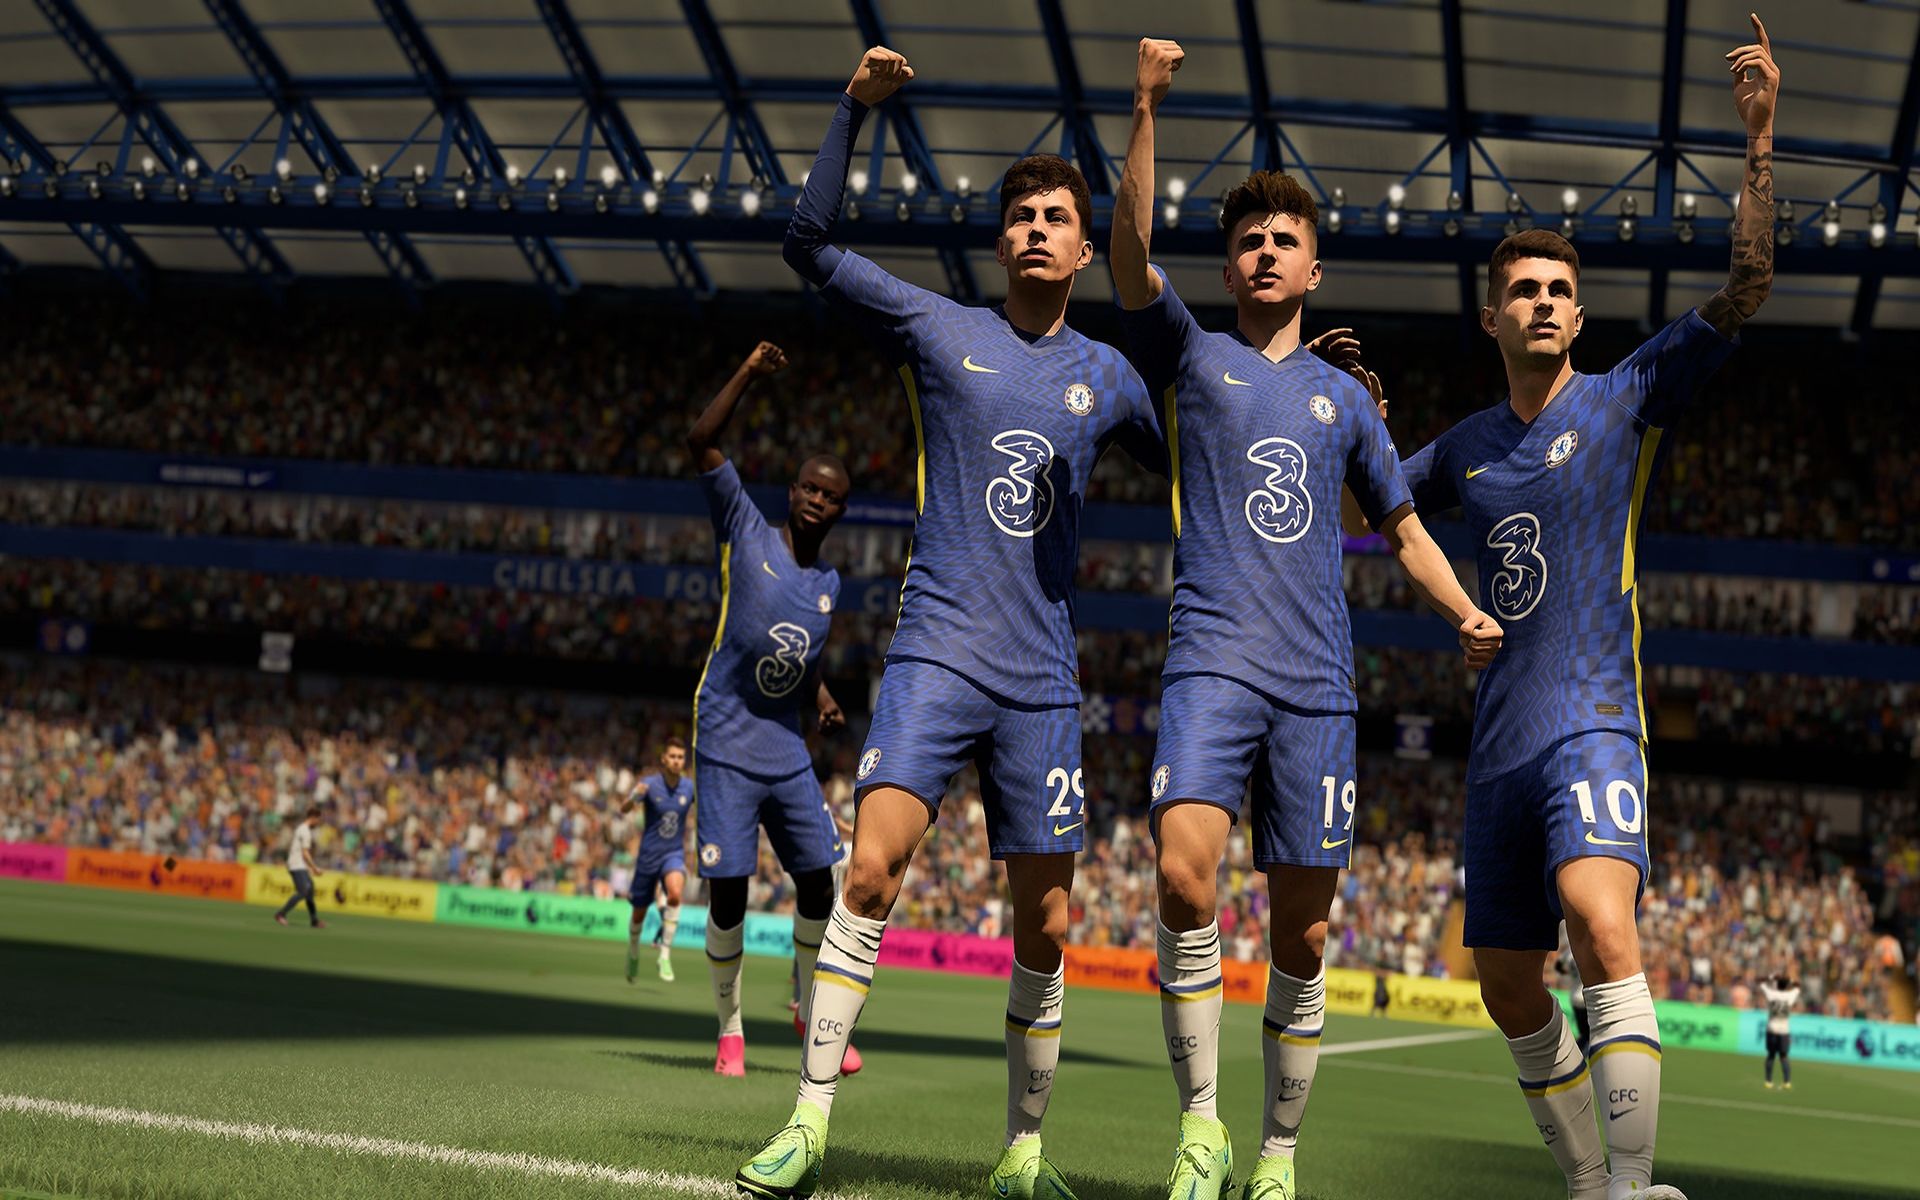 FIFA 22 maintenance is a highly criticized topic right now, are FUT servers down? Unfortunately, the answer is yes. FUT maintenance is underway.